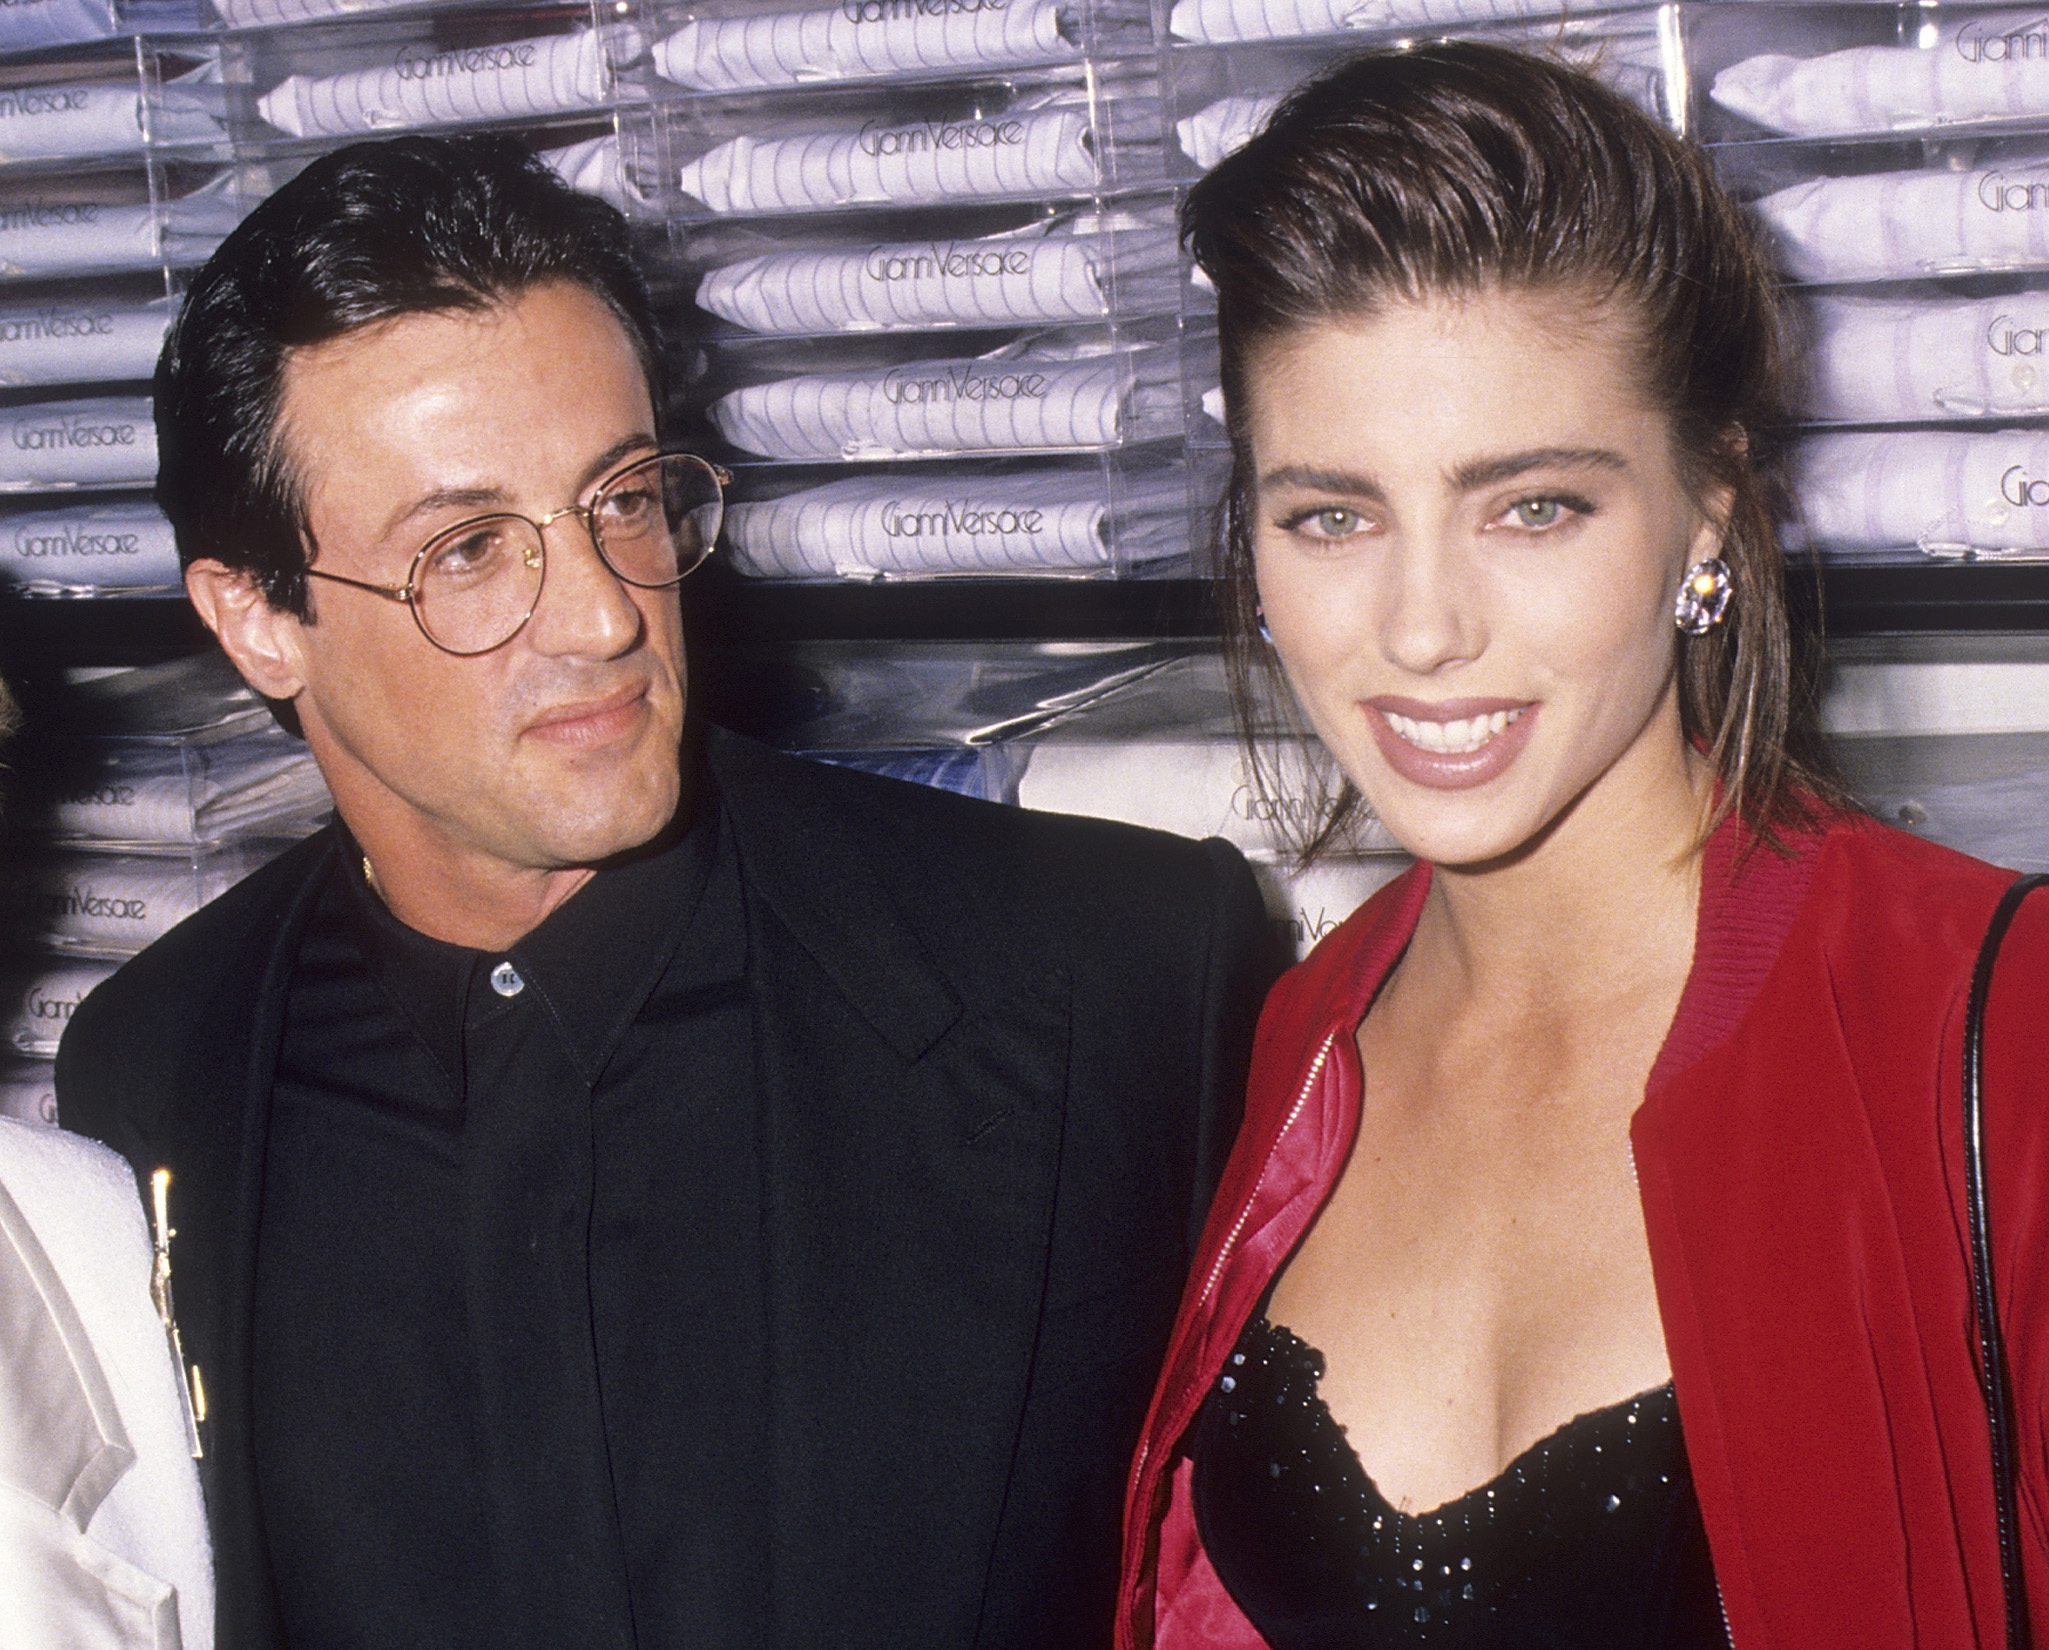 <p>Sylvester Stallone was a twice-divorced movie star in his early 40s when he met 19-year-old model Jennifer Flavin at a restaurant in 1988. Nearly six years into their romance, he dumped her via FedEx: "He sent me a six-page handwritten letter, in pen," Jennifer told <a href="https://people.com/archive/rocky-ending-vol-41-no-16/">People</a> magazine in a 1994 interview. "It was pretty sloppy." Days later, she learned from her Elite modeling agent that Sly had been having an affair with another model, Janice Dickinson, who'd given birth to a daughter a month earlier. "It hit me like a ton of bricks," Jennifer told the magazine. But after a paternity test revealed that the "Rocky" star wasn't the baby's father, he and Jennifer reconciled in 1995, had the first of three daughters together in 1996 and married in 1997. Sly had previously bragged about his and Jennifer's unorthodox relationship in 1991, saying, as reported by People, "When we come together, it is wonderful. When we are separate, there are no strings attached. That's the way it is. No strings." In 1992, Jennifer insisted, "I'm not naive about what may go on when I'm not around — he's a 45-year-old man — I can't change the way he is. Still," she added, "he's not a cheating dog every day of the week. We spend five out of seven nights together, so I don't know where he'd find the lime." In 2022, she <a href="https://www.wonderwall.com/celebrity/couples/celebrity-breakups-splits-of-2022-famous-couples-divorce-549565.gallery?photoId=641350">filed for divorce</a> after 25 years of marriage -- but <a href="https://www.wonderwall.com/celebrity/couples/tk-plus-more-celeb-love-news-653034.gallery">they reconciled</a> just a month later.</p>